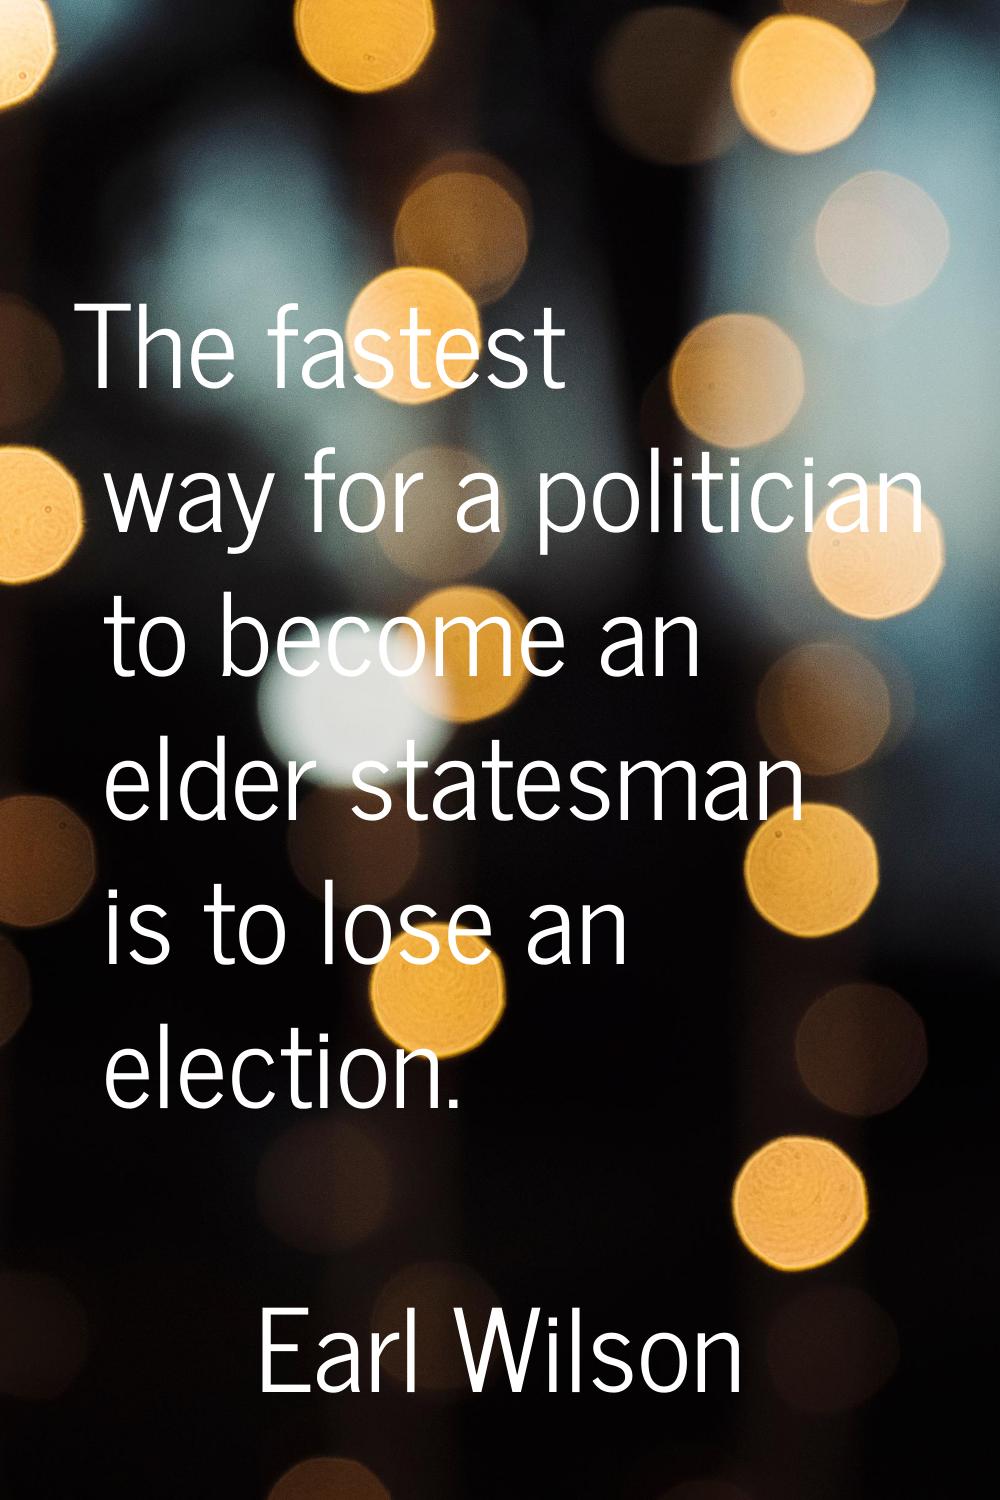 The fastest way for a politician to become an elder statesman is to lose an election.